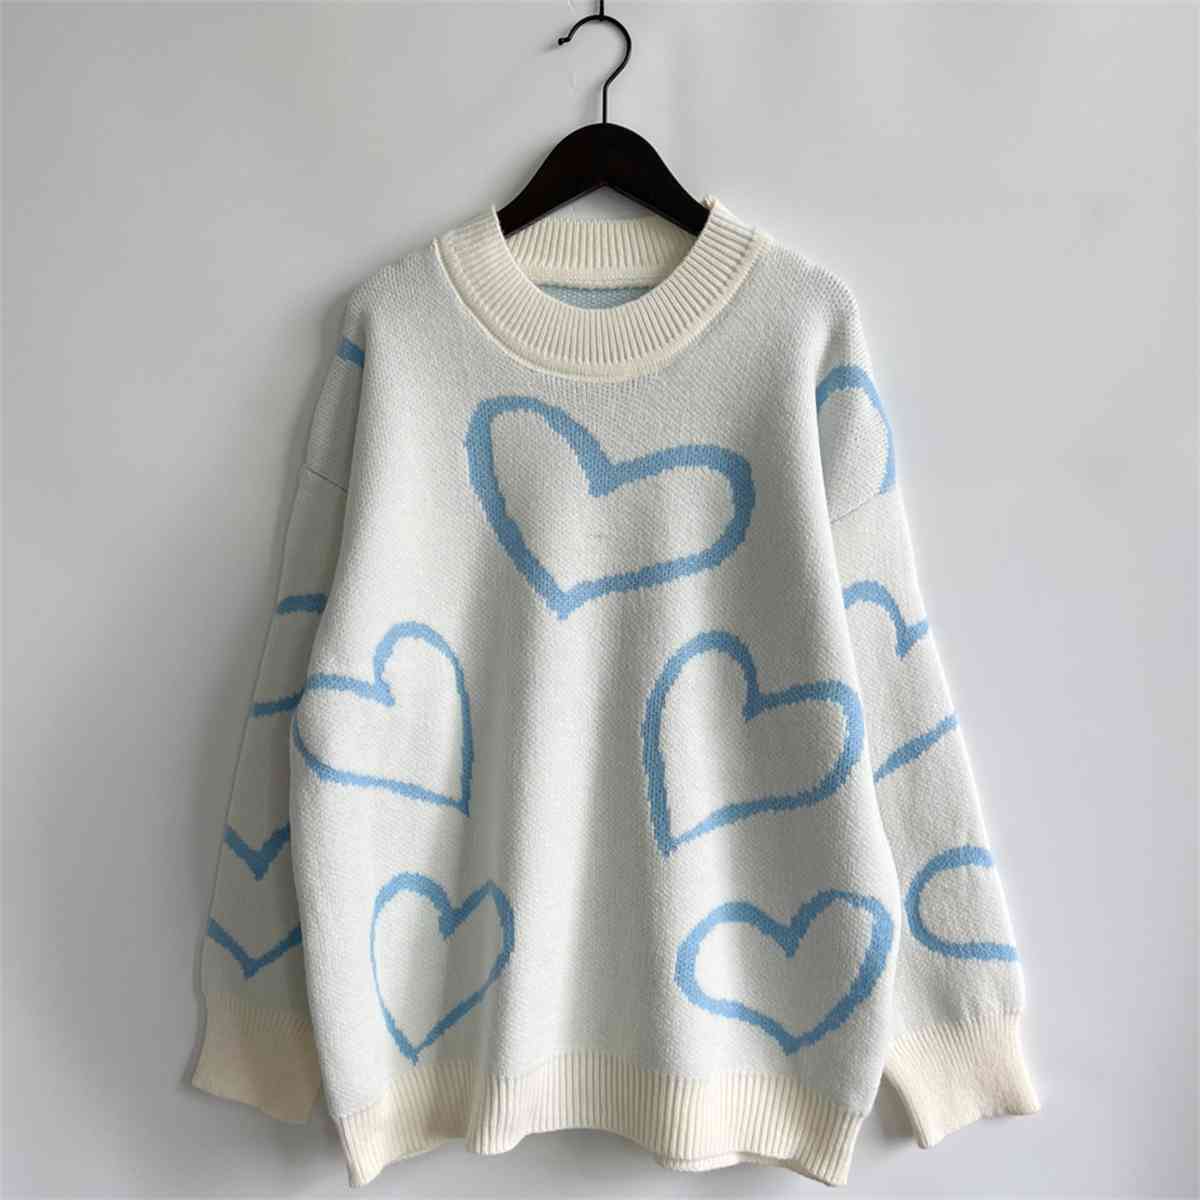 Knit Heart Color Contrasting Classic Long Sleeve Round Neck Pullover Sweater Top